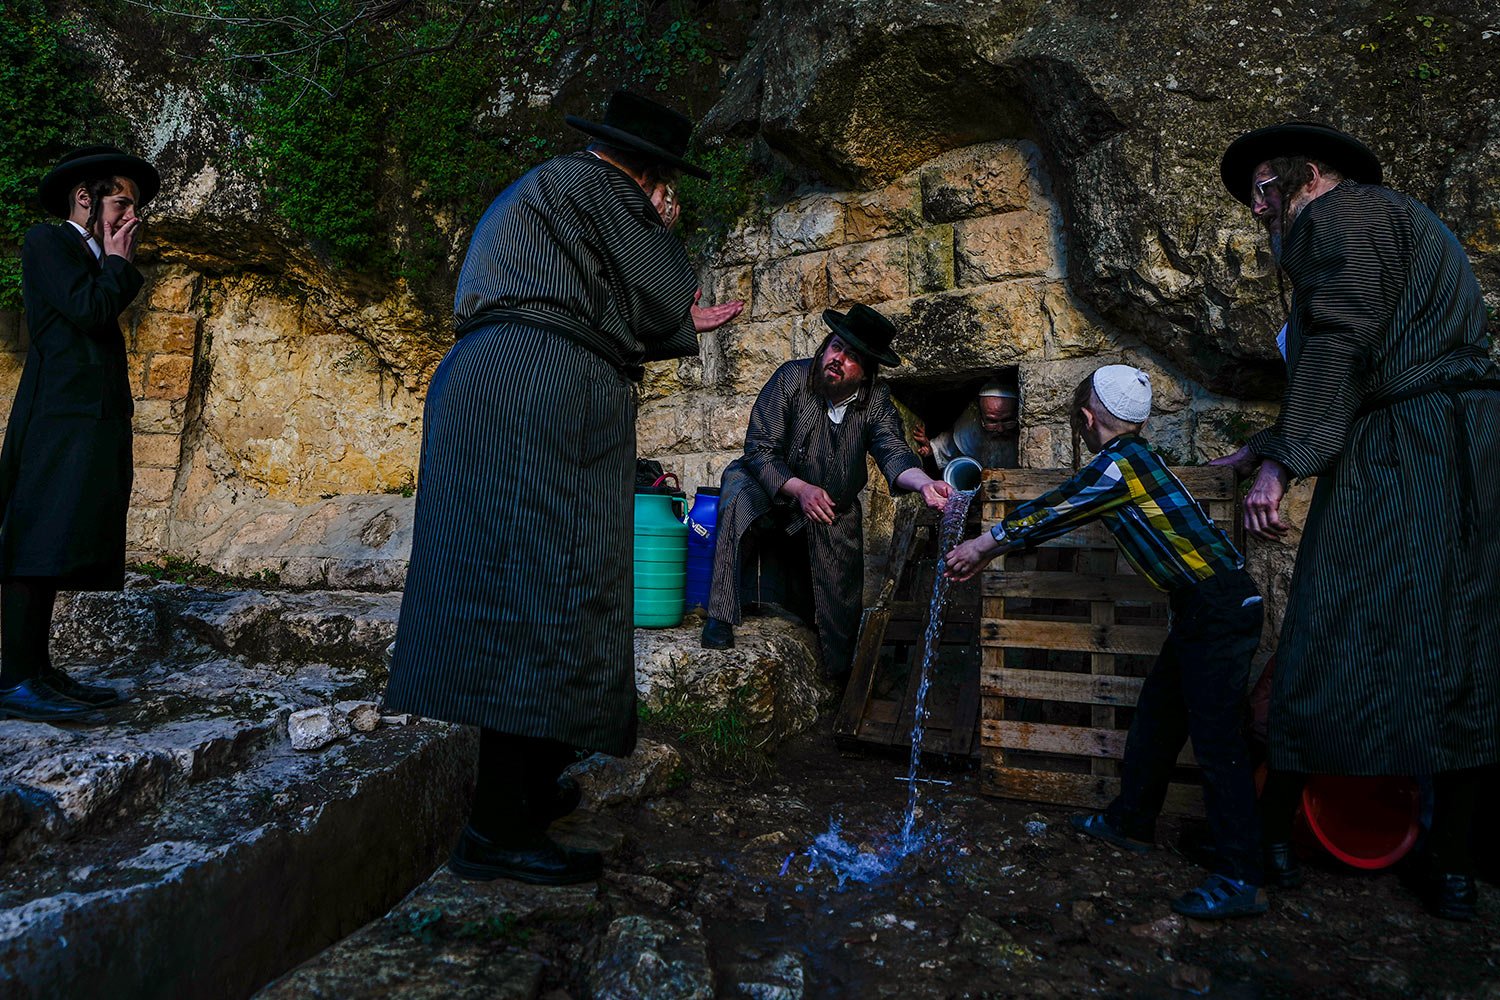  Ultra-Orthodox Jews collect water from a spring to make matzoh, a traditional handmade unleavened bread for Passover, during the Maim Shelanu ceremony at a mountain spring in the outskirts of Jerusalem, Tuesday, April 4, 2023. (AP Photo/Ariel Schali